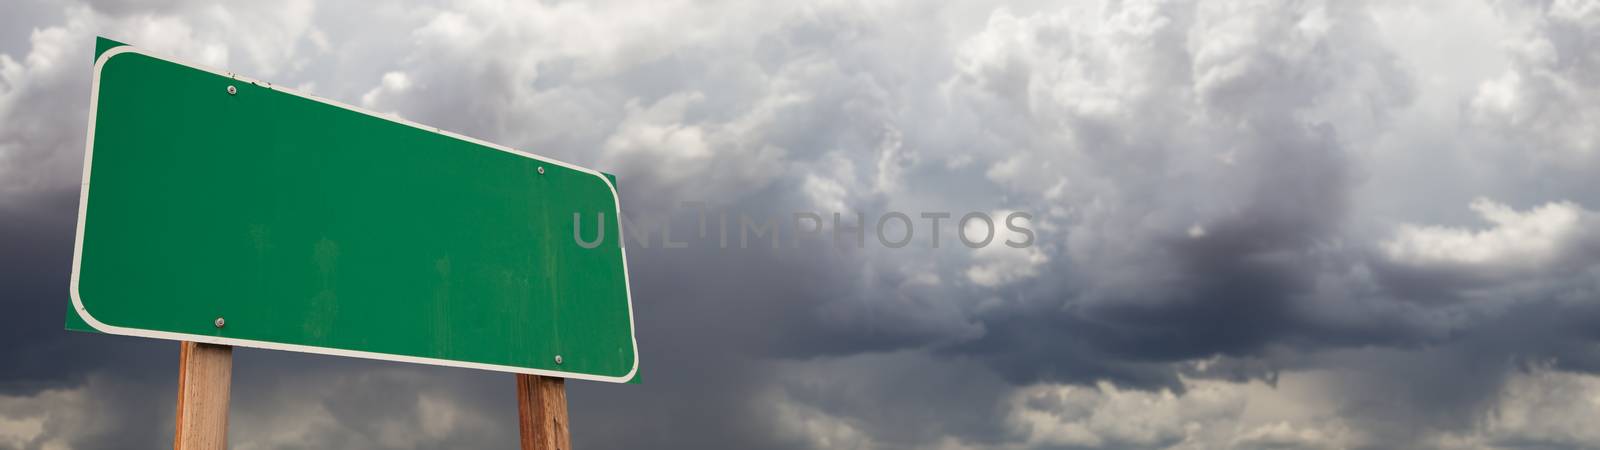 Blank Green Road Sign Against Ominous Cloudy Stormy Sky Backgrou by Feverpitched